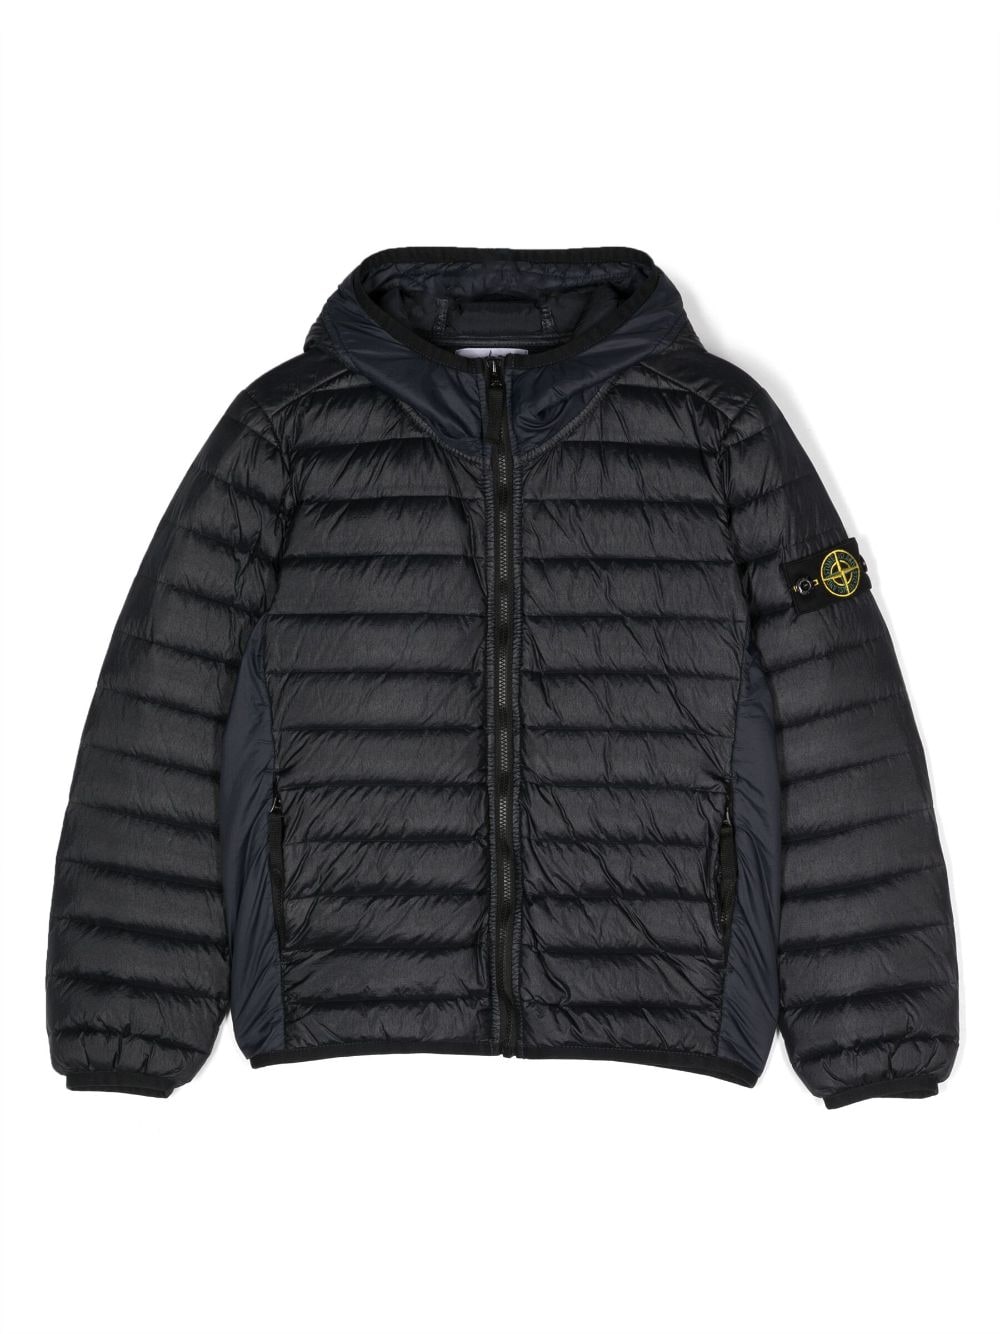 Compass-patch hooded padded jacket